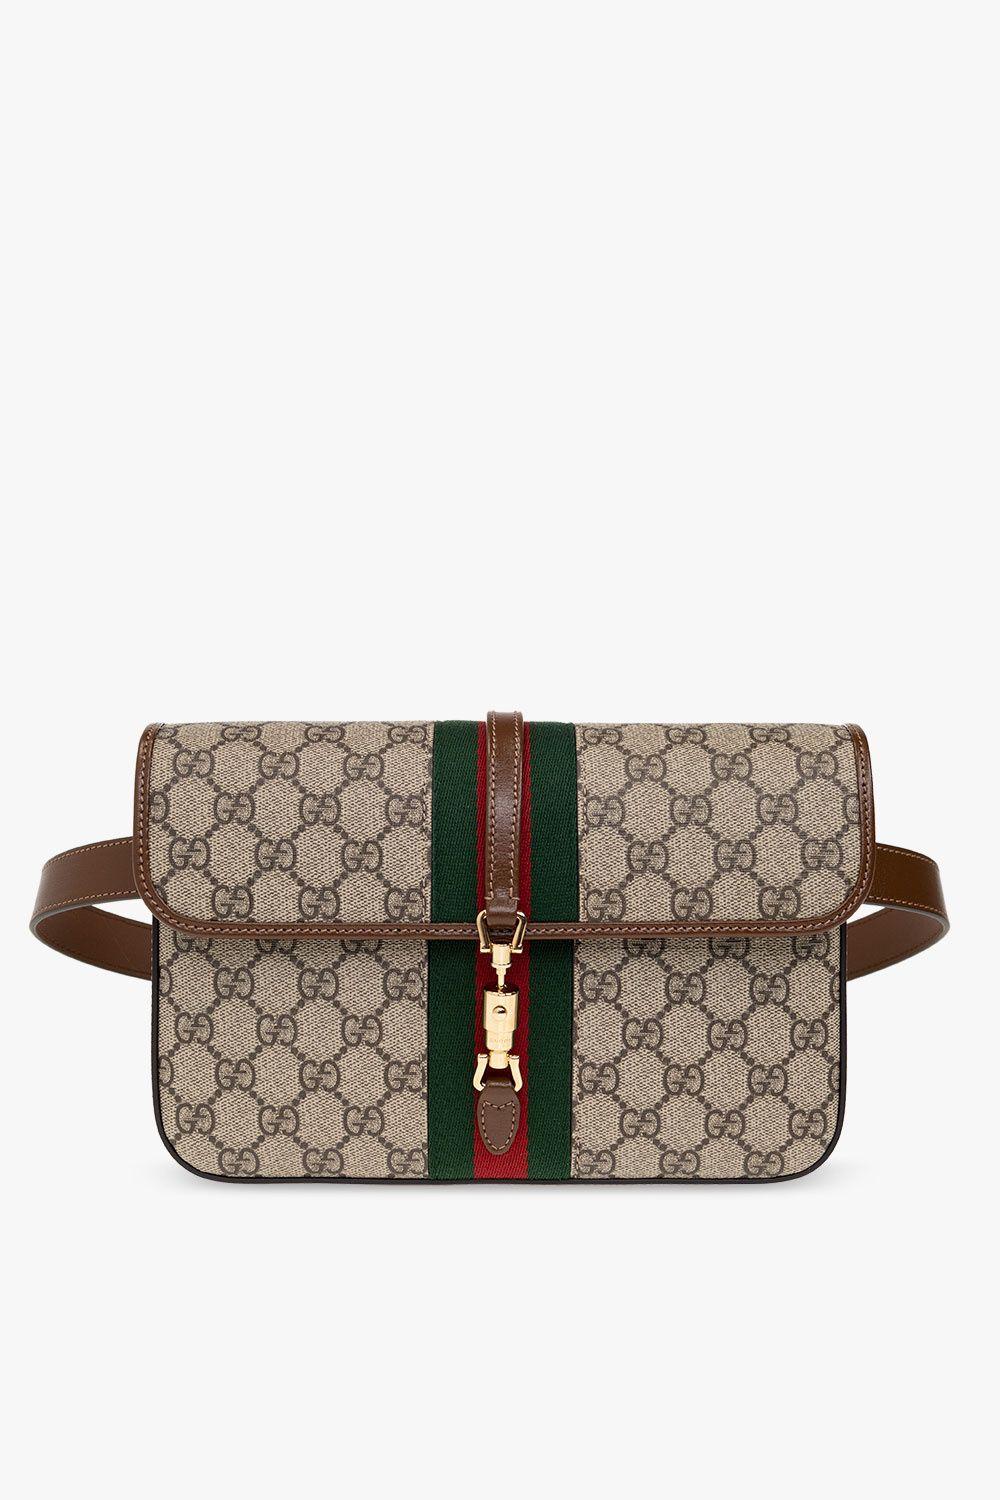 Gucci Beige/Red GG Coated Canvas and Leather Belt Bag Gucci